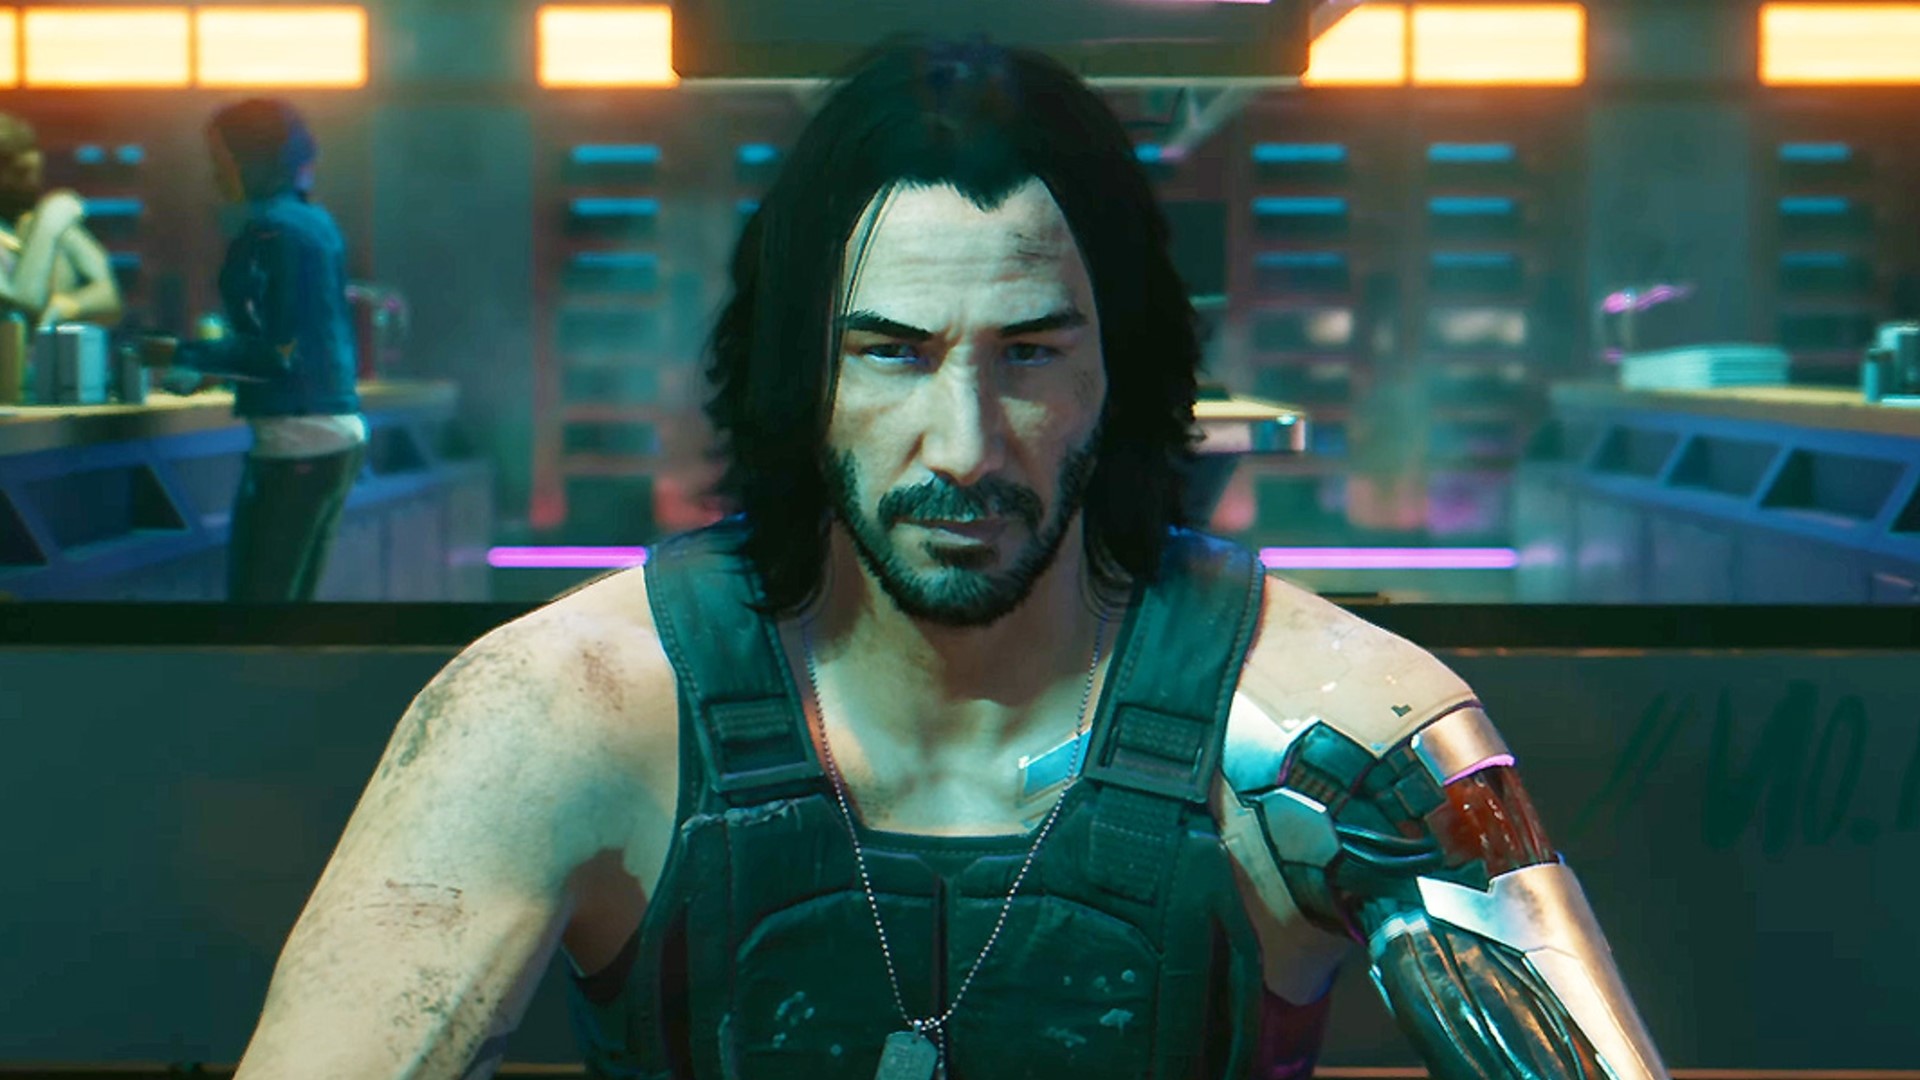 Cyberpunk 2077 To Get Nvidia DLSS3 And Ray Tracing: Overdrive